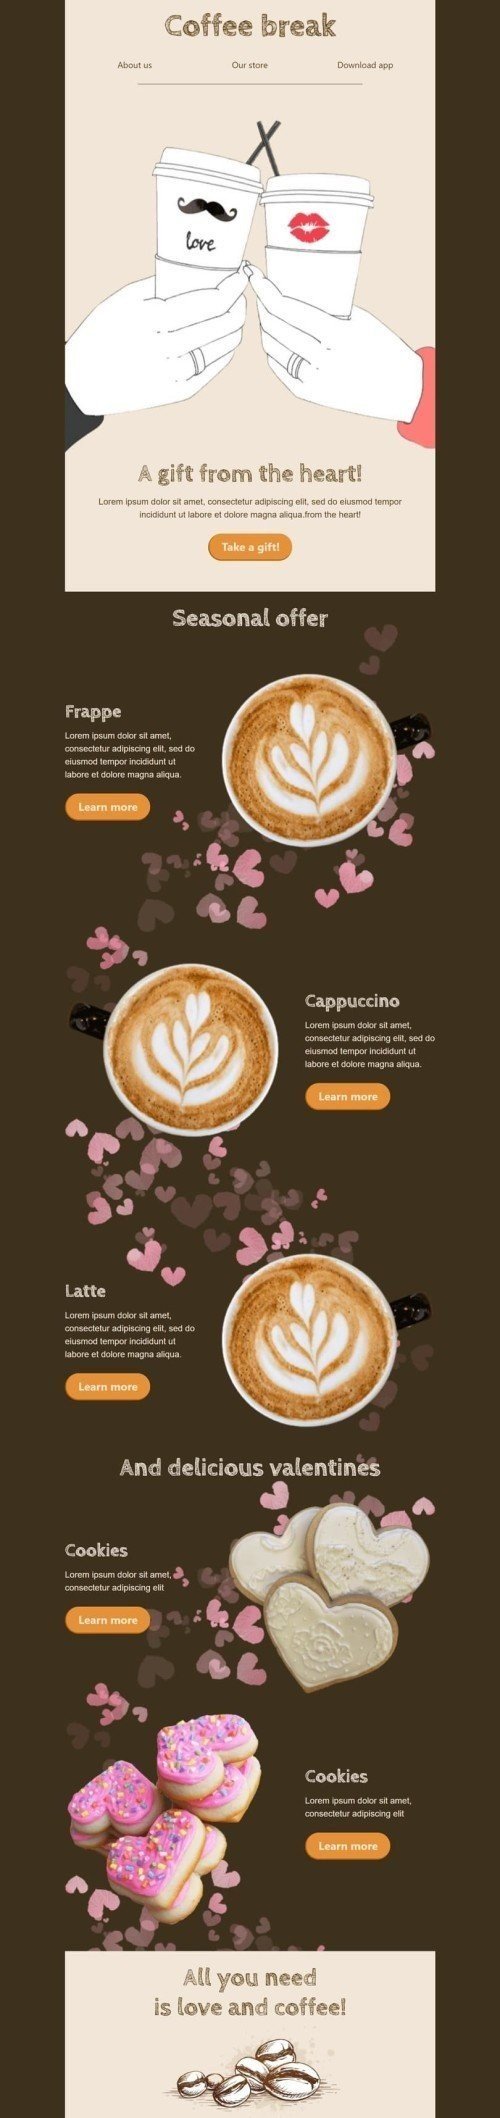 Valentine’s Day Email Template «Coffee Break» for Beverages industry desktop view